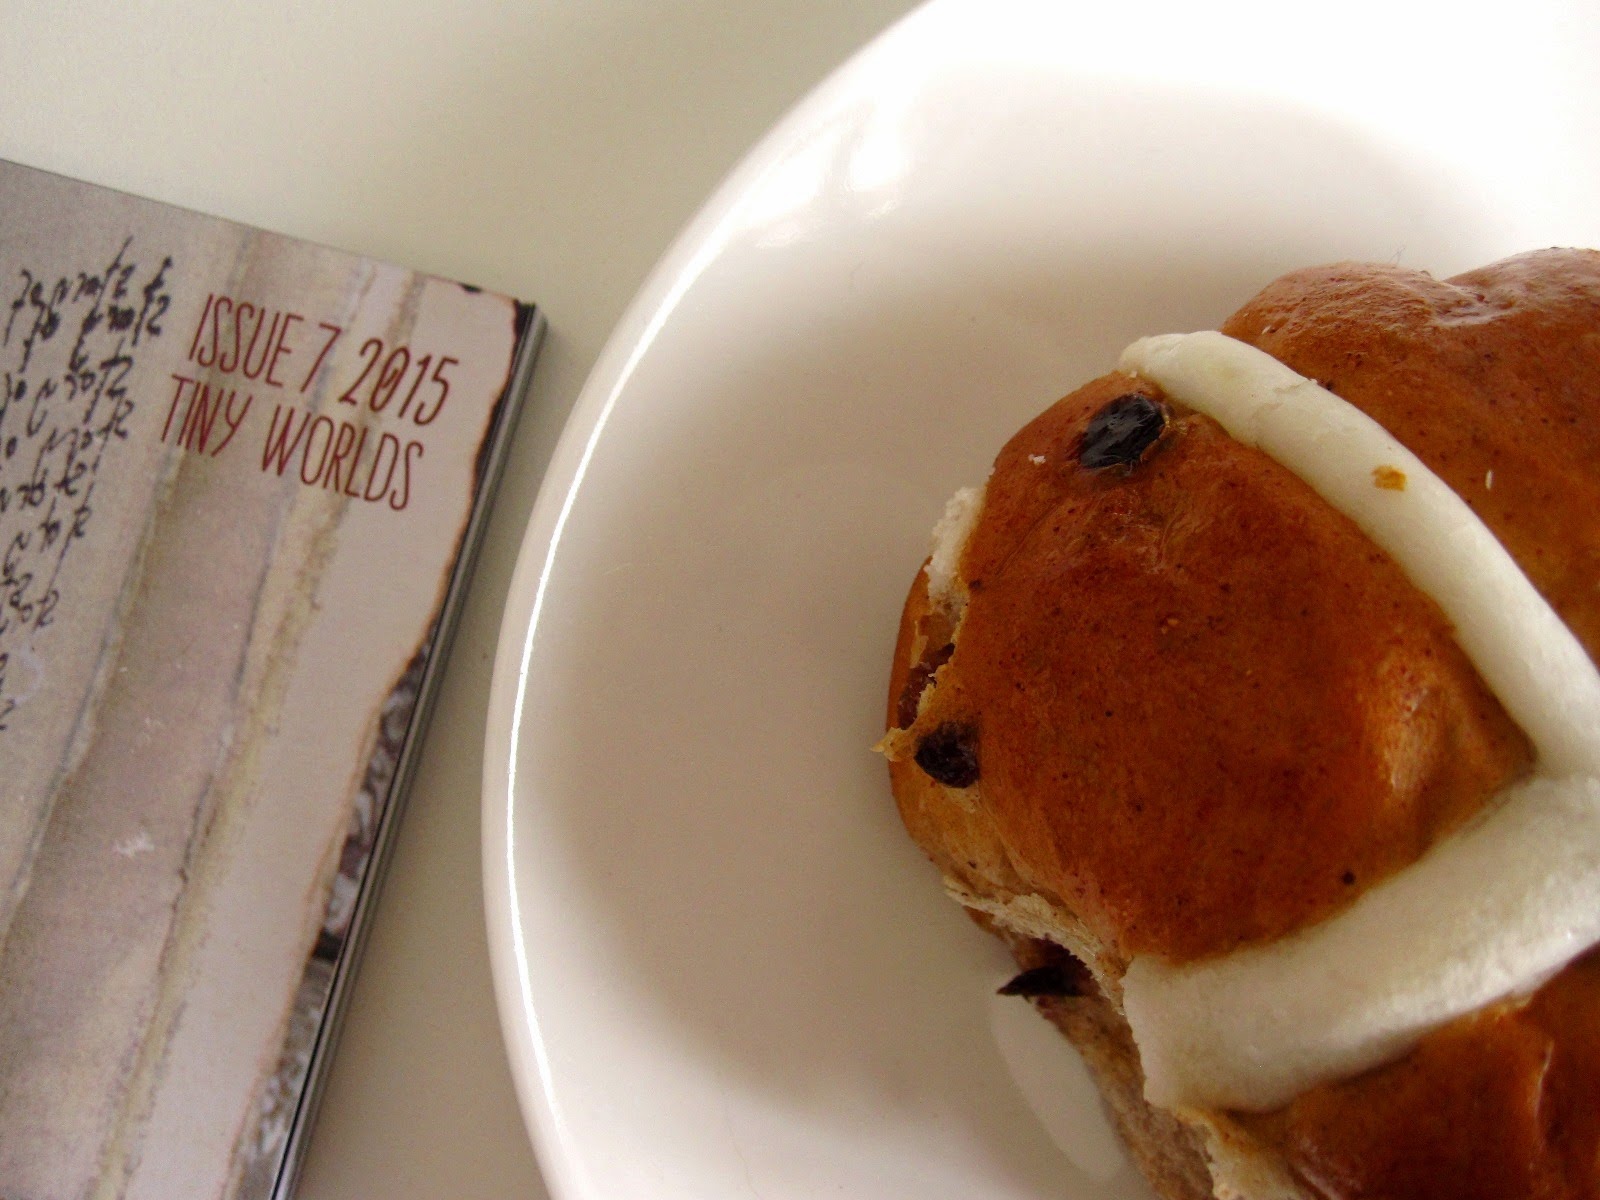 Magazine with 'Issue 7 205: Tiny worlds' written on the cover, next to a mini hot cross bun on a saucer.